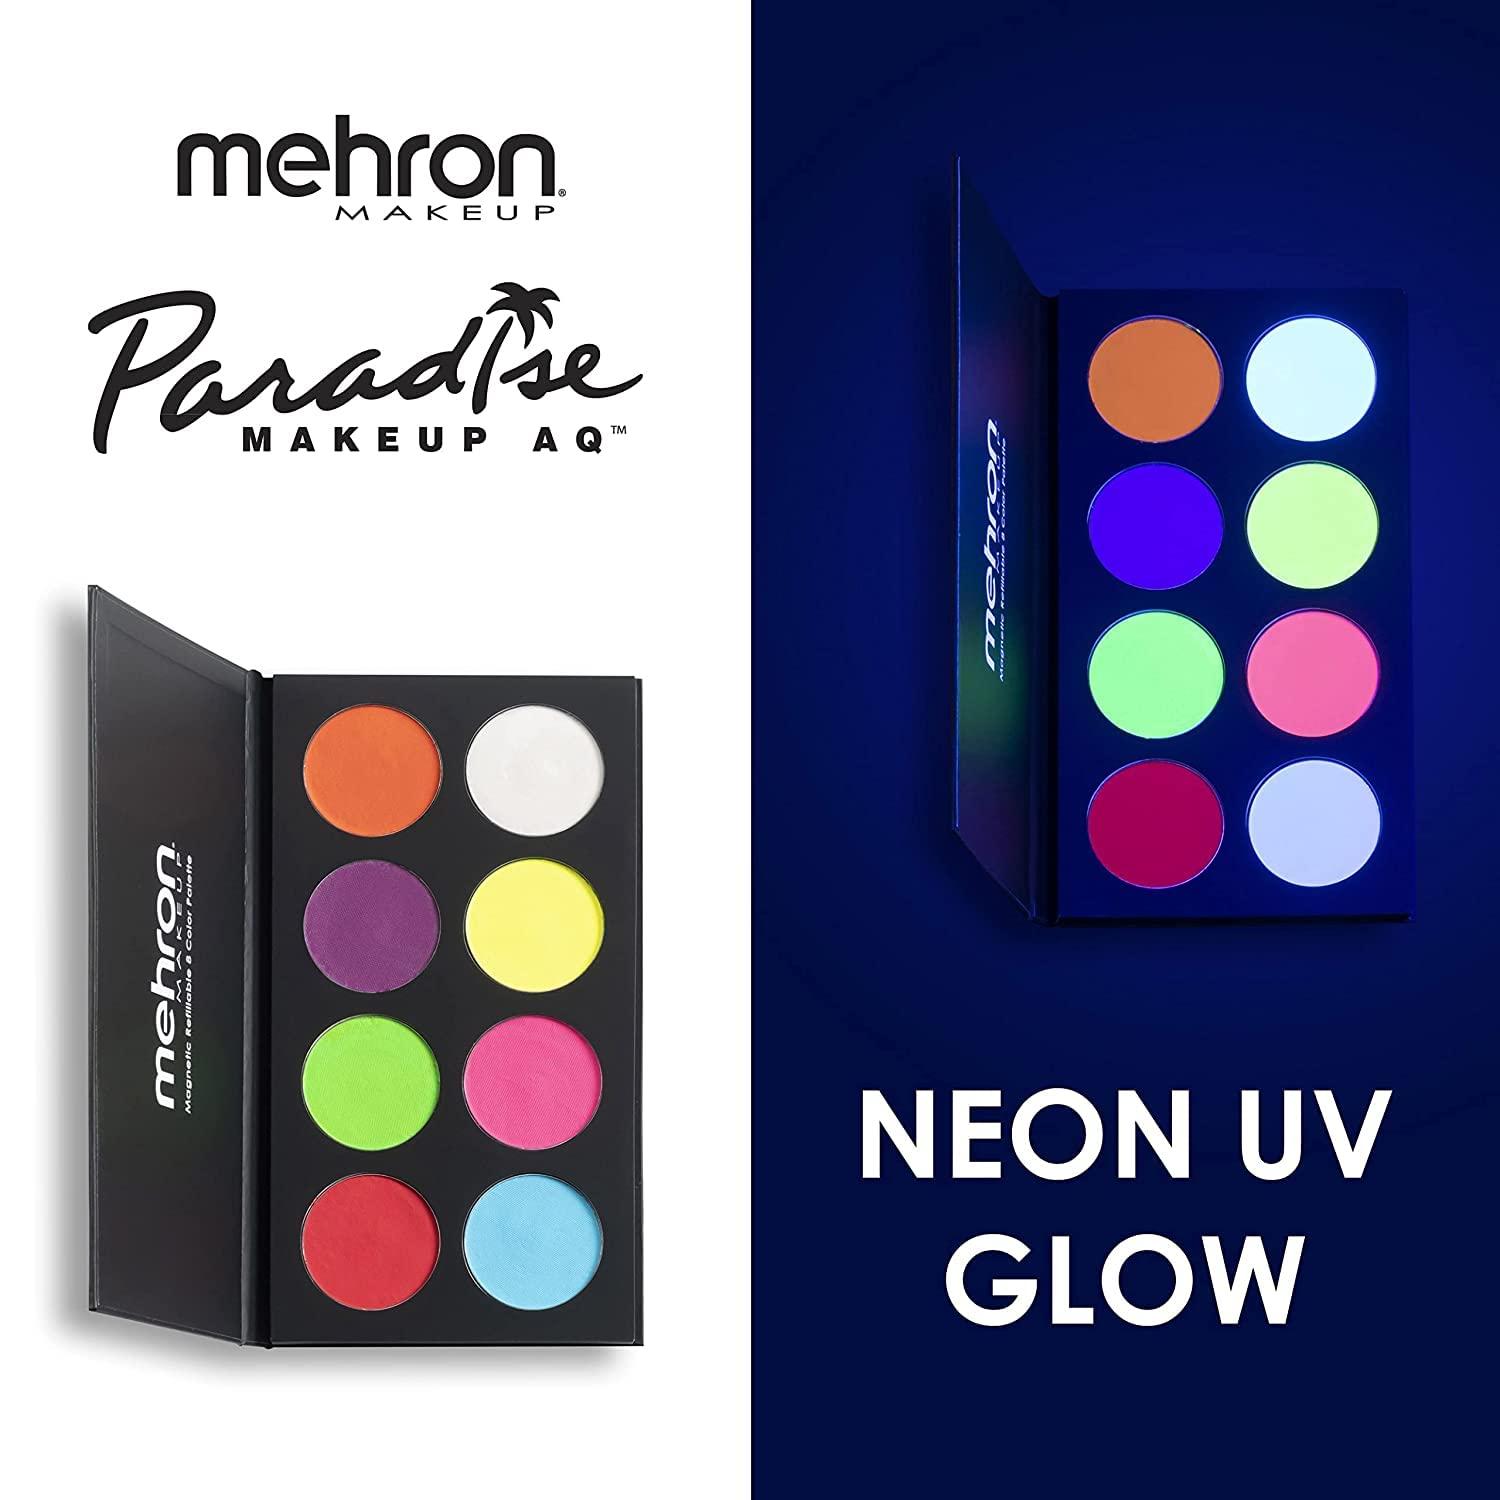 Mehron Makeup Paradise AQ Face & Body Paint 8 Color Palette (Neon UV Glow)  - Face Body Black Light Makeup Palette Special Effects UV Glow Rave  Accessories Halloween and Cosplay